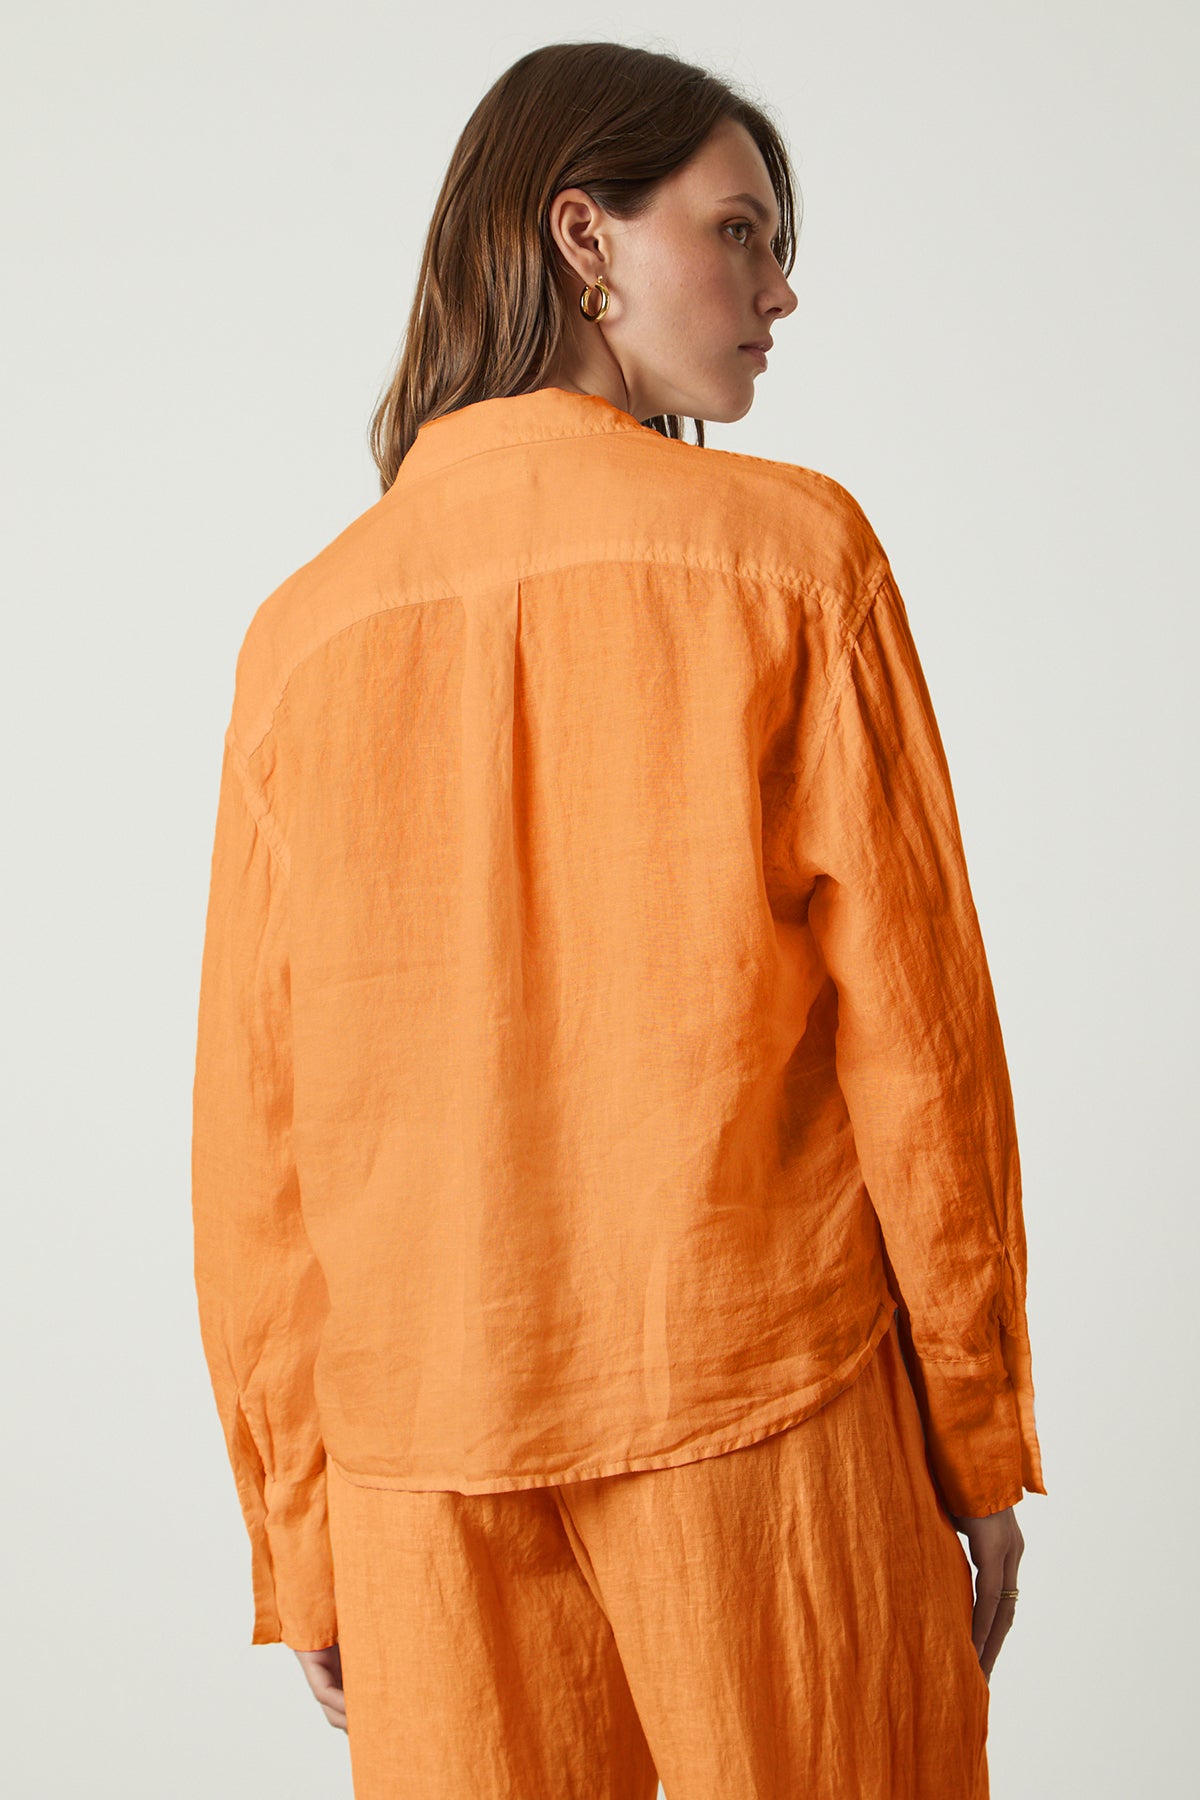   Eden button up shirt in orange heat with Lola pant back 